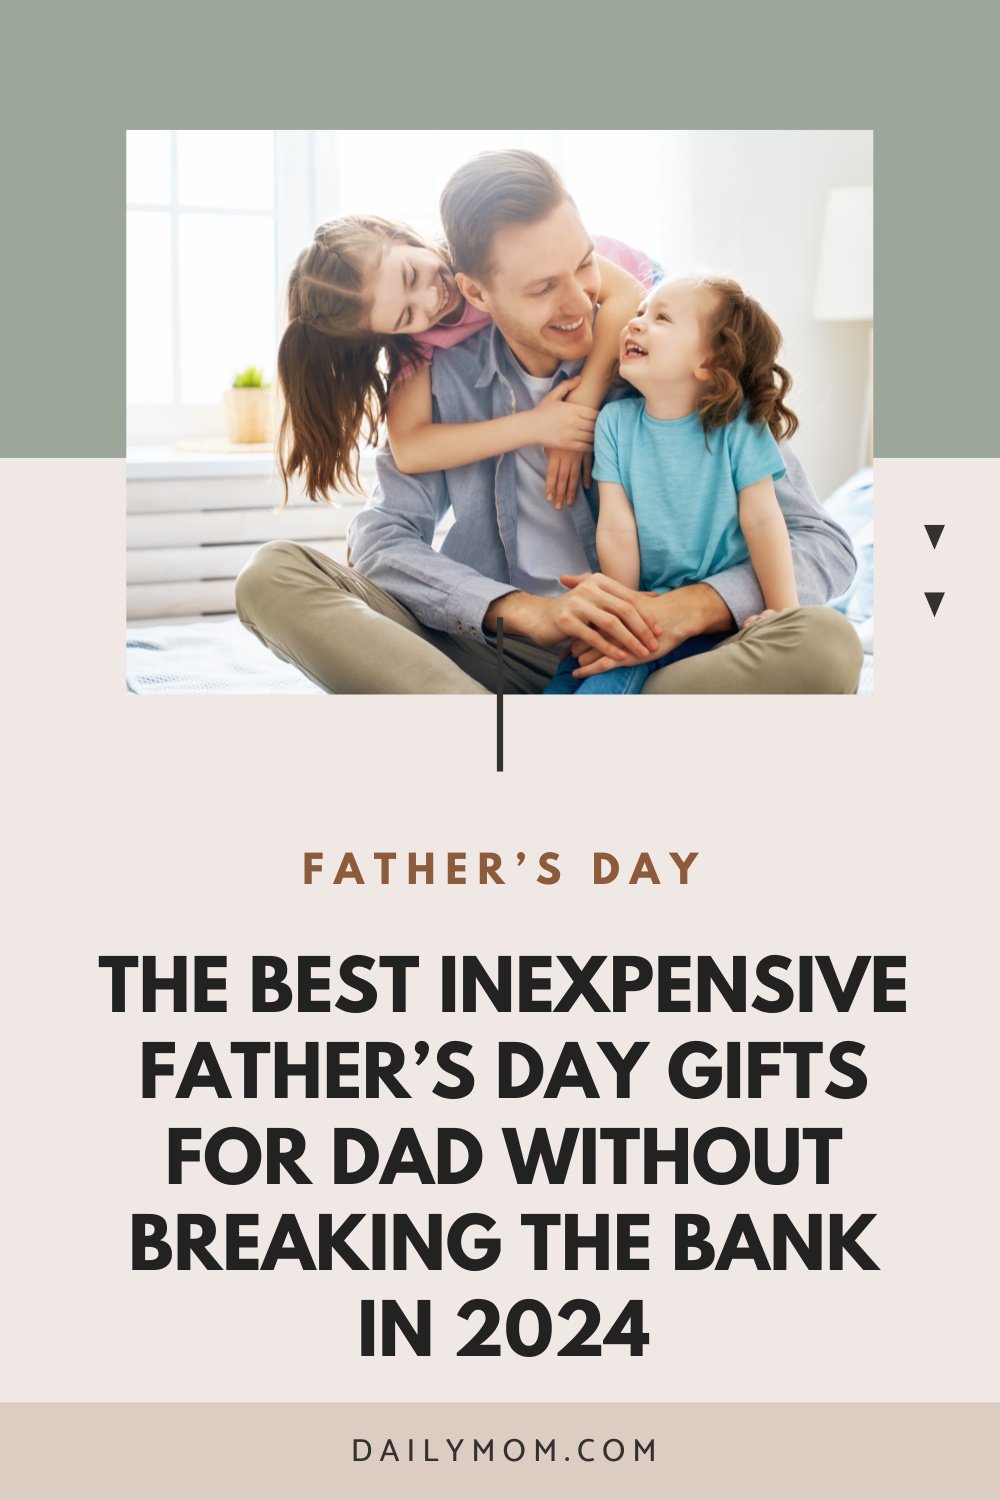 The Best Inexpensive Father'S Day Gifts For Dad Without Breaking The Bank In 2024 52 Daily Mom, Magazine For Families